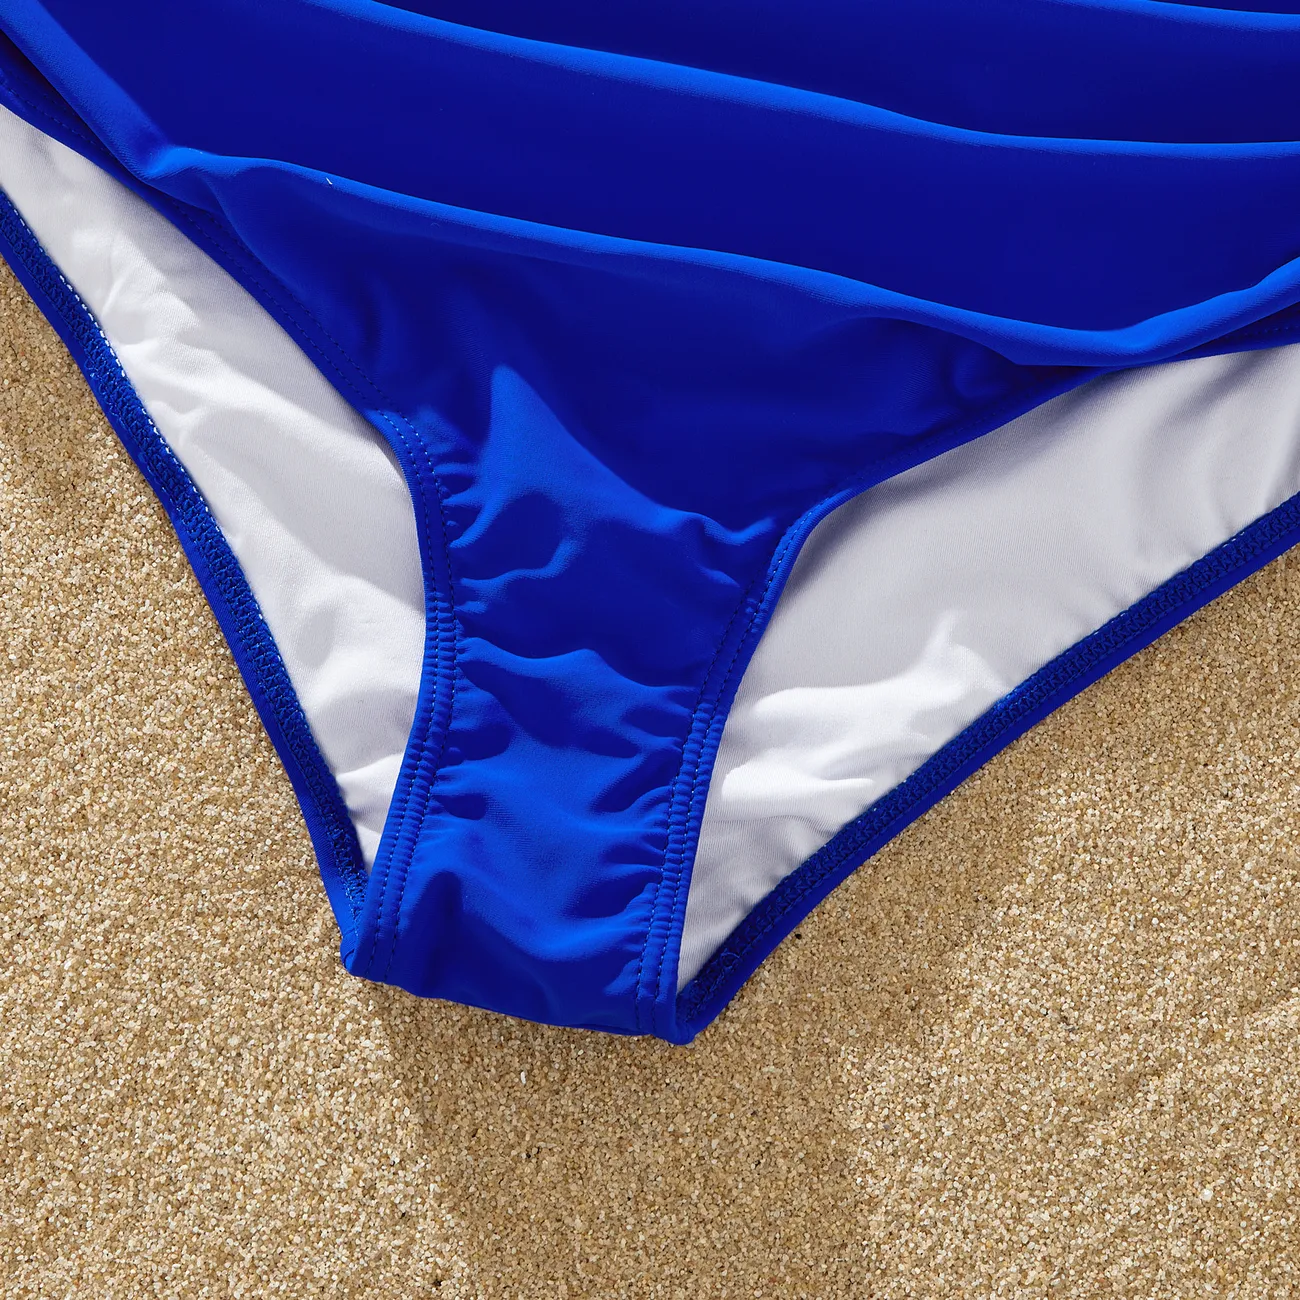 Family Matching Blue Ruffle Trim Two-piece Swimsuit and Letter Print Swim Trunks Blue big image 1